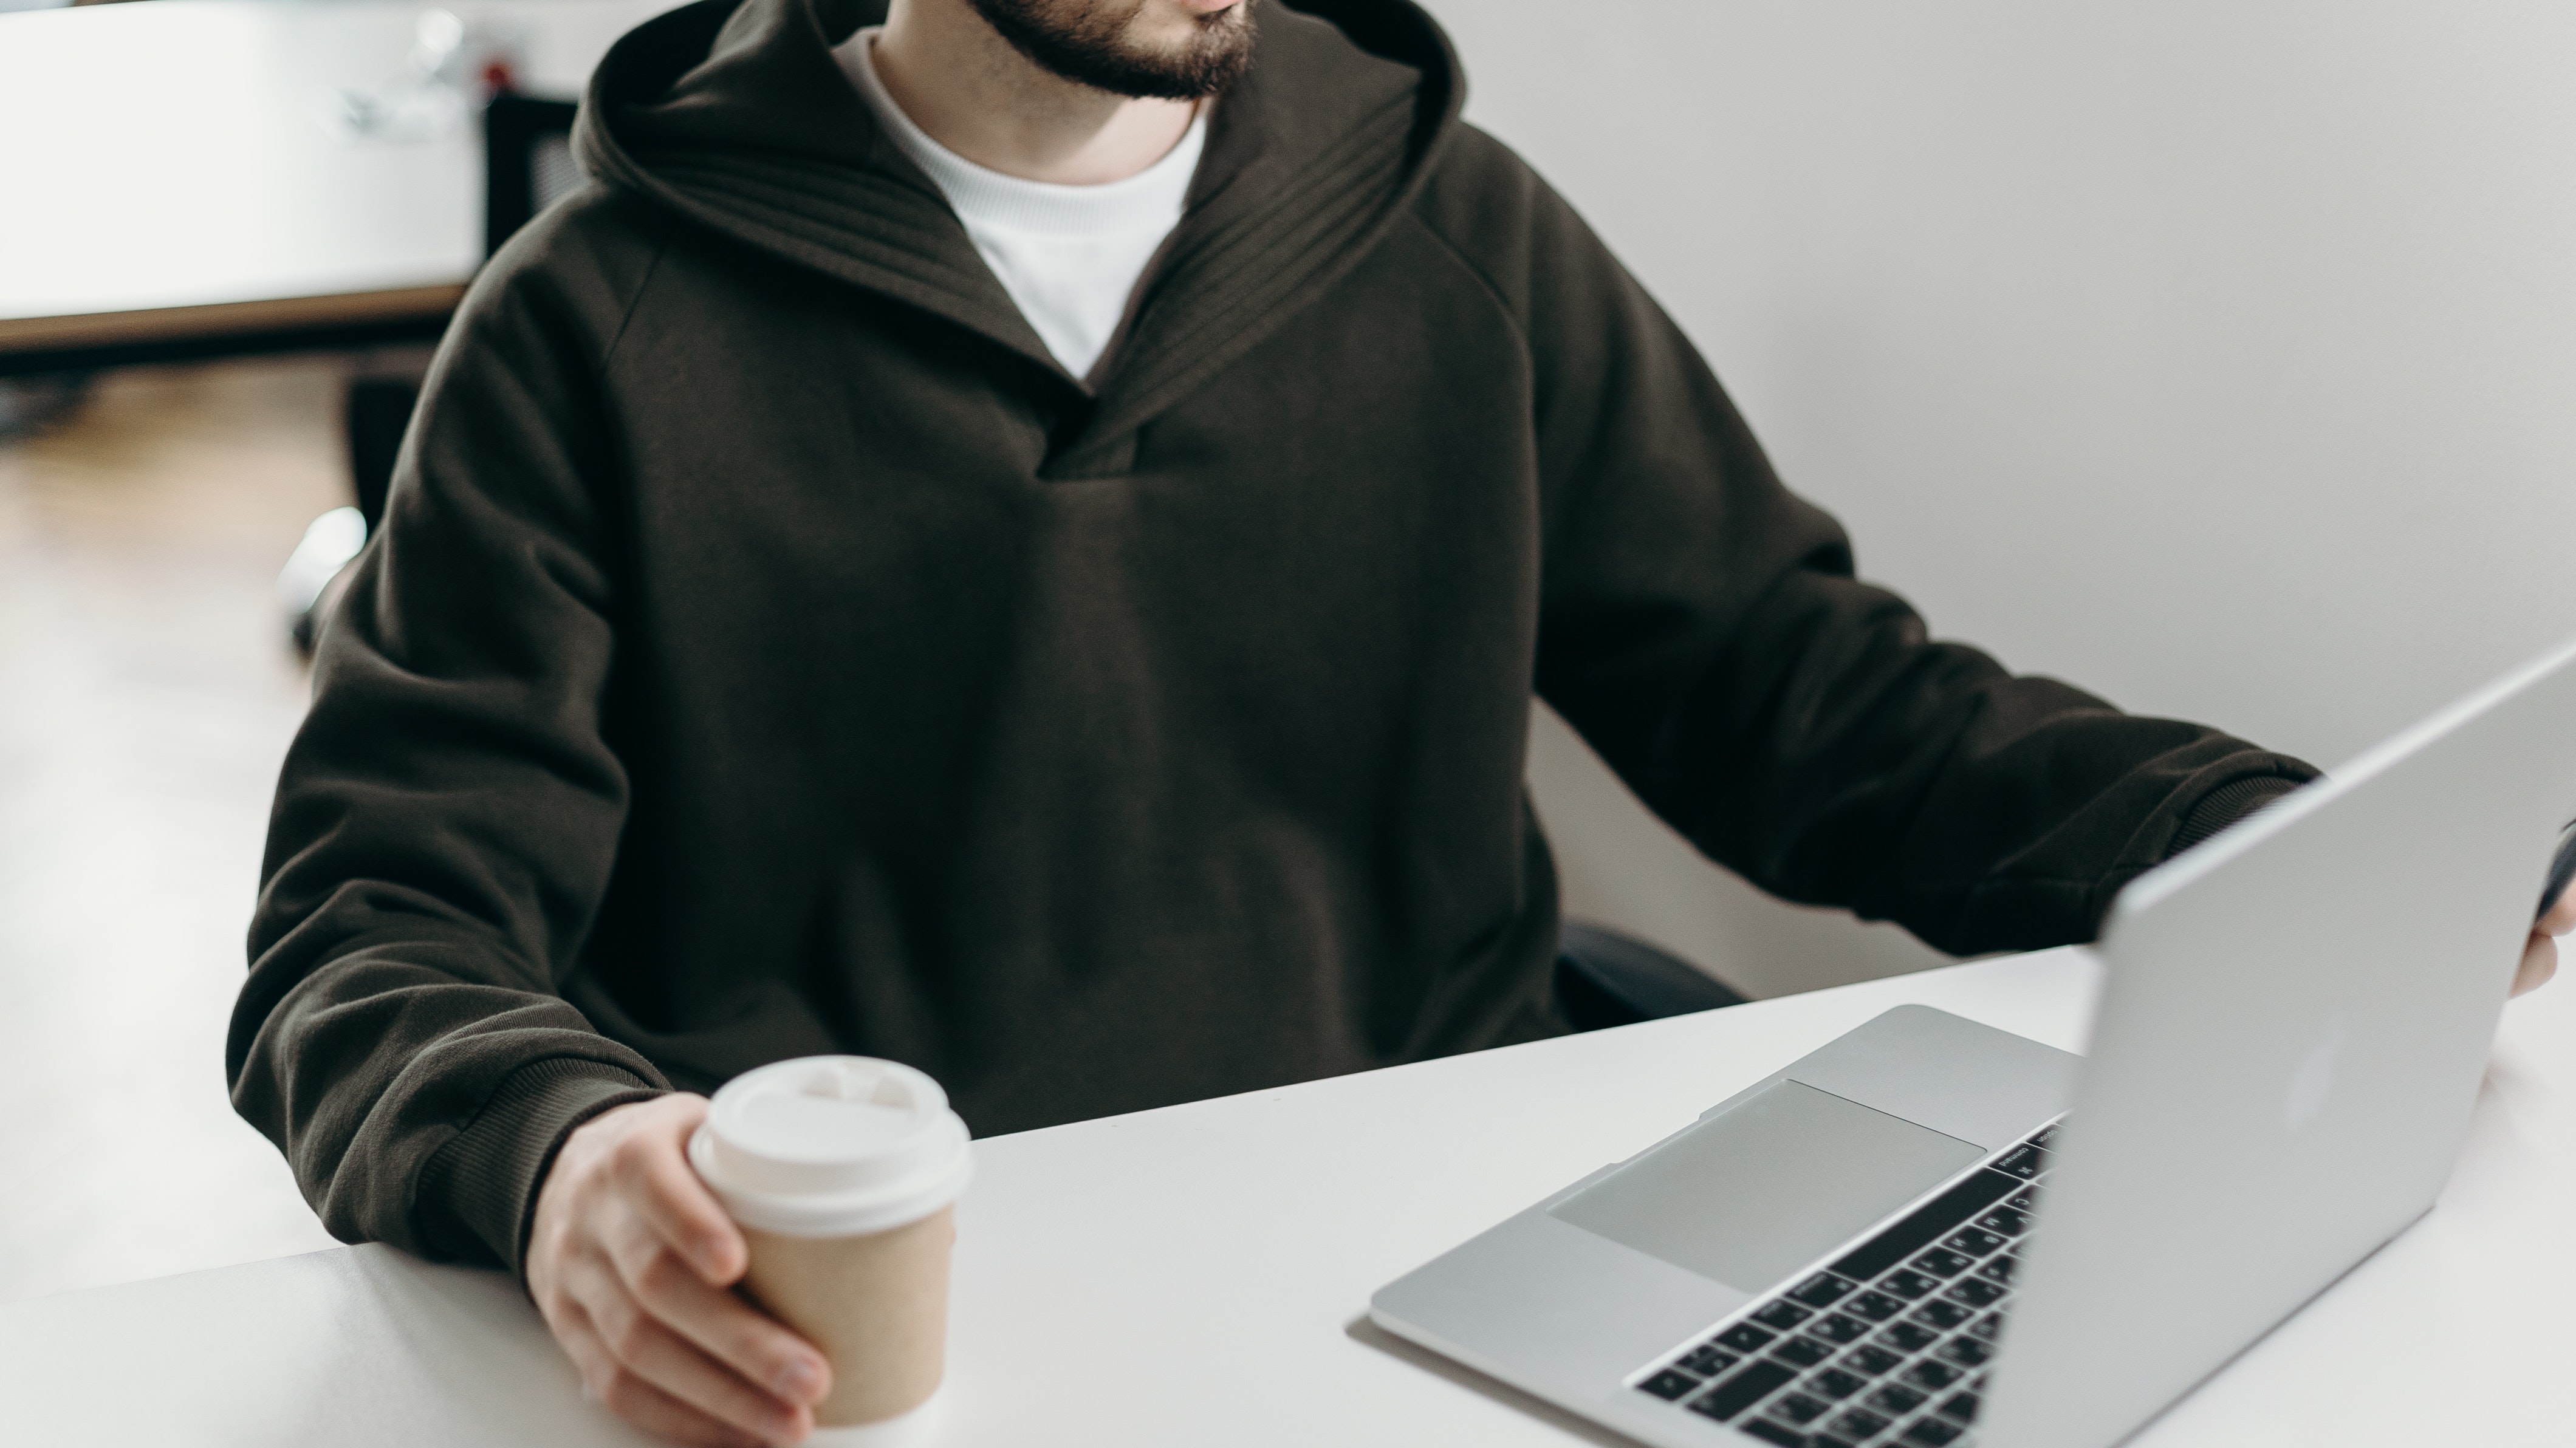 Image of a guy working from home on his laptop. Showing someone who could benefit from online therapy in Portland, Oregon. Whith support you can address blurred boundaries with an online therapist.